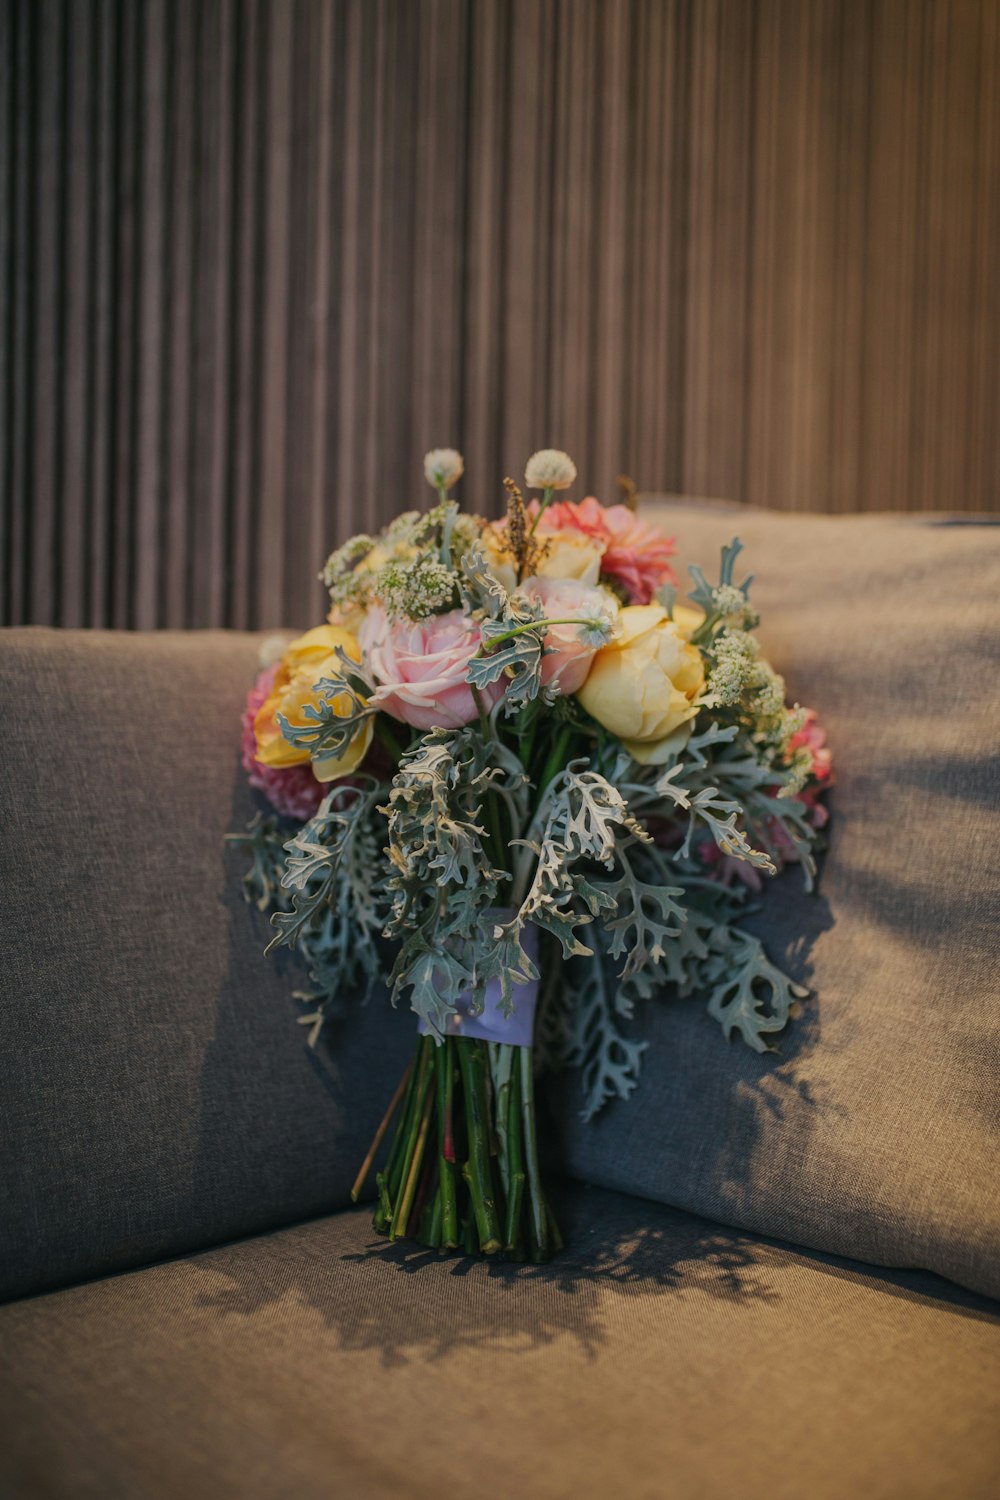 bouquet of rose flowers on gray sofa inside room